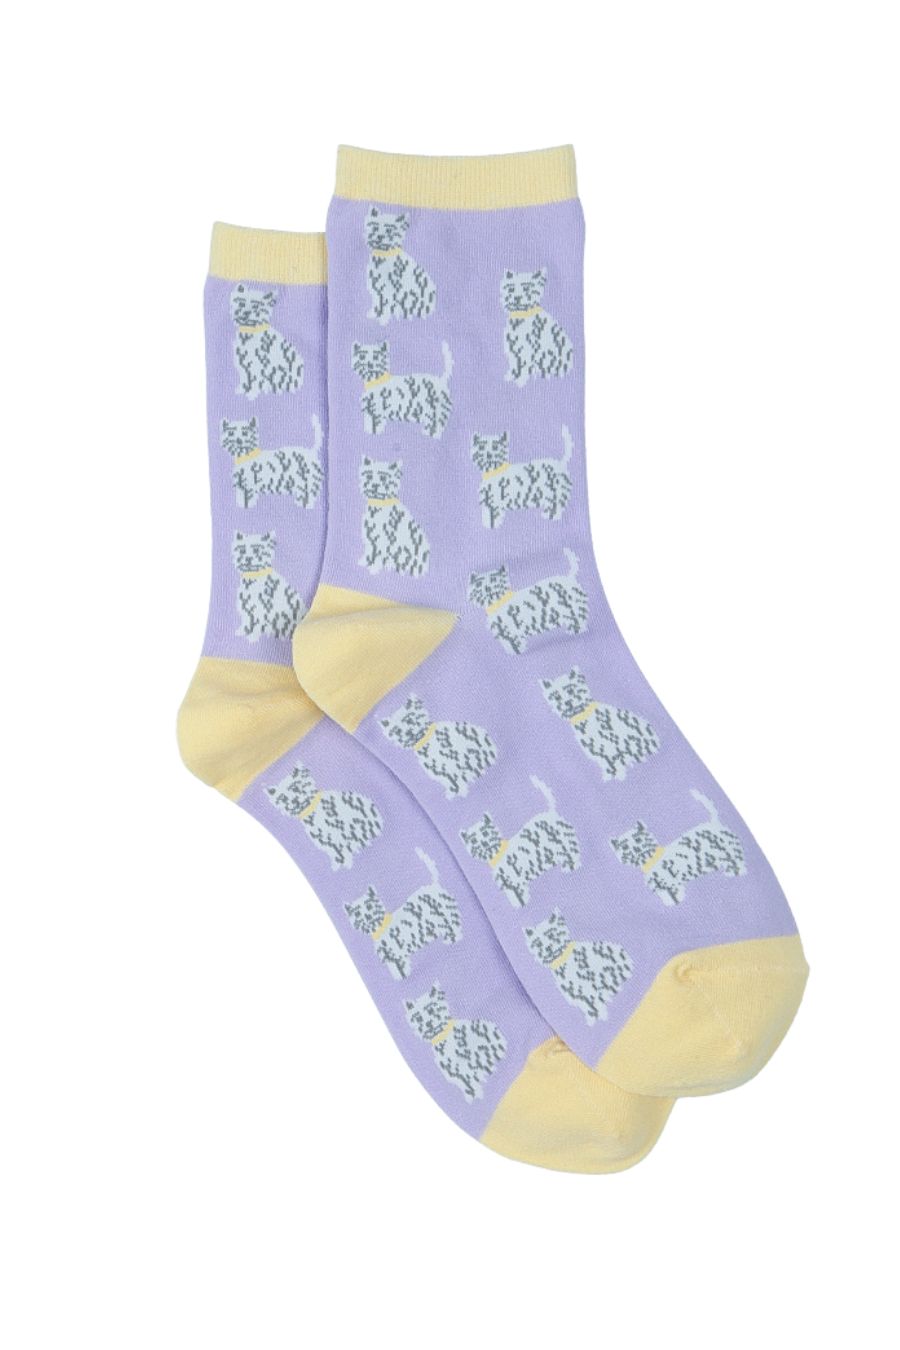 lilac dog socks with west highland terriers